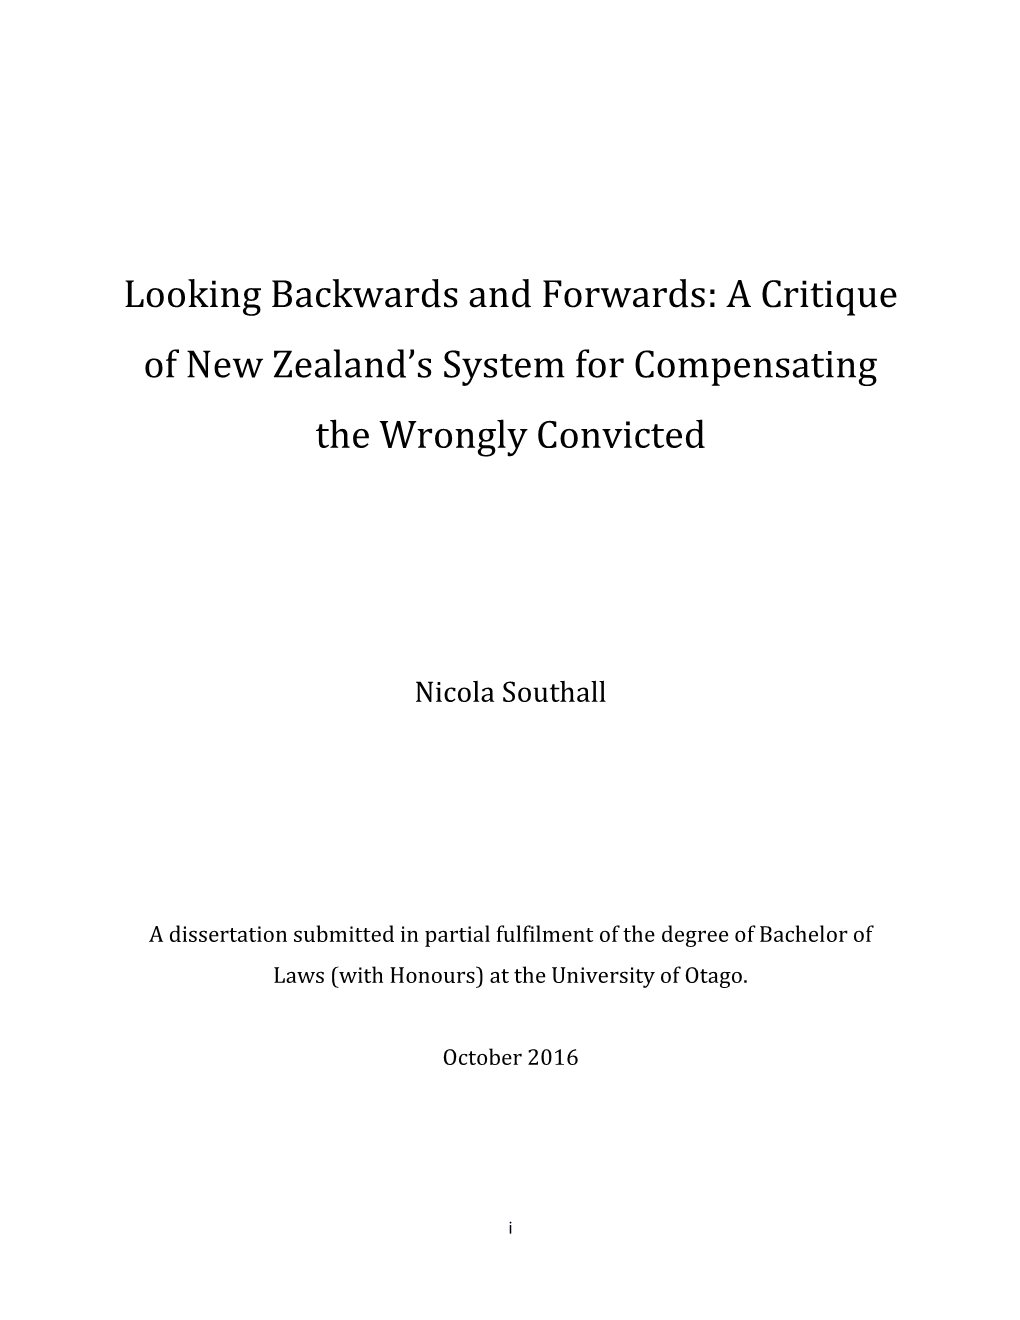 A Critique of New Zealand's System for Compensating the Wrongly